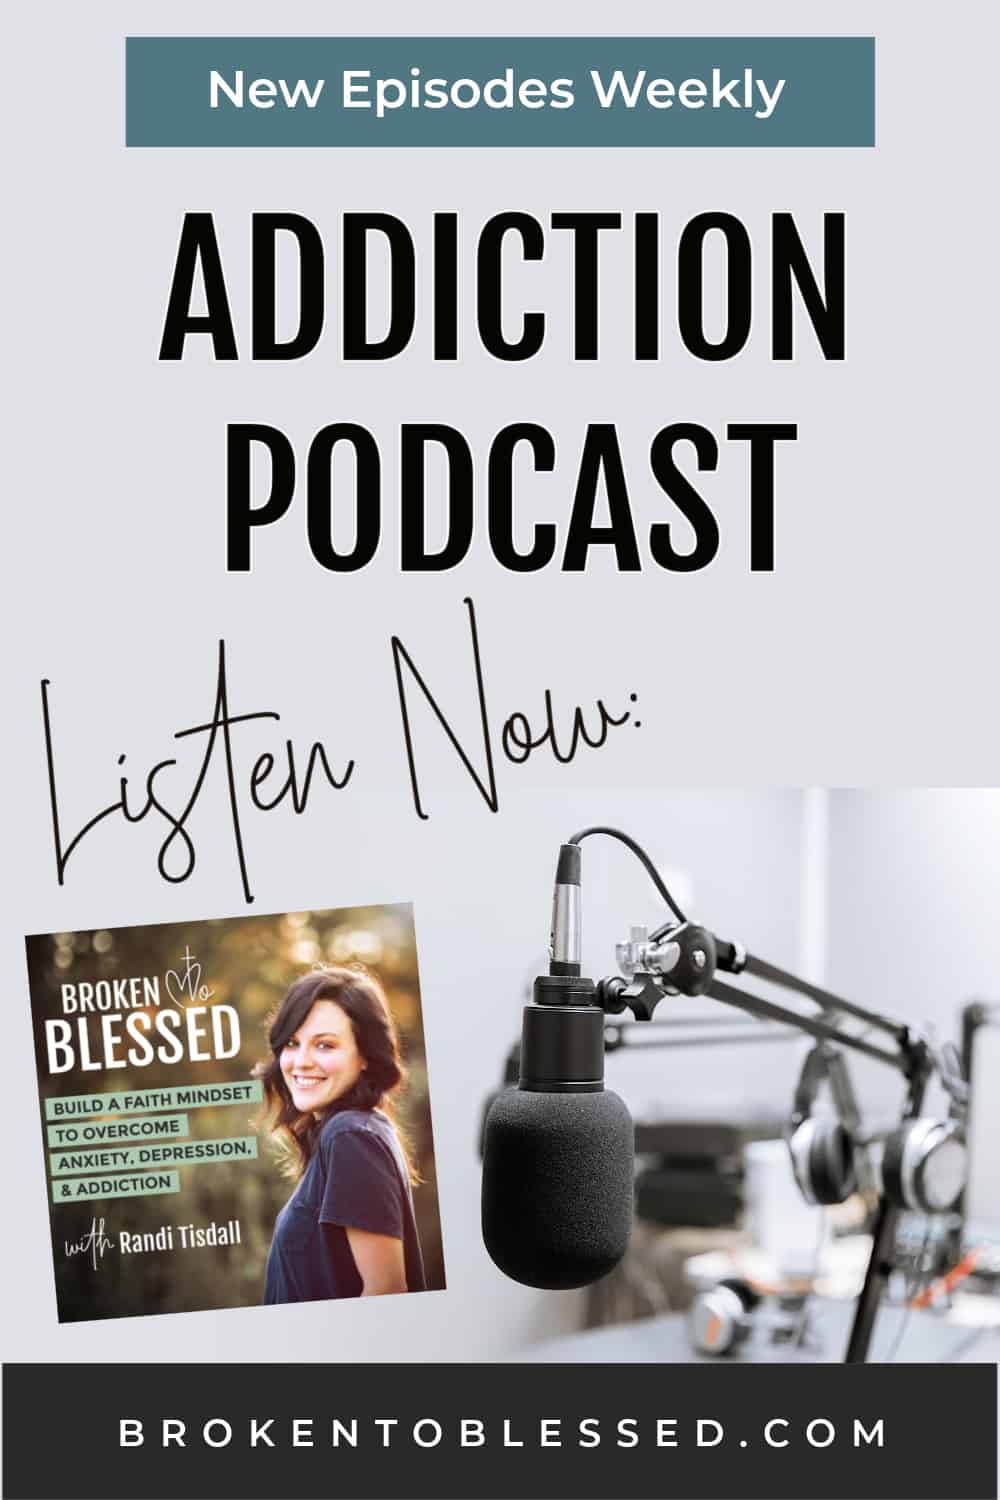 Share this on Pinterest | Broken to Blessed addiction podcast promo image 